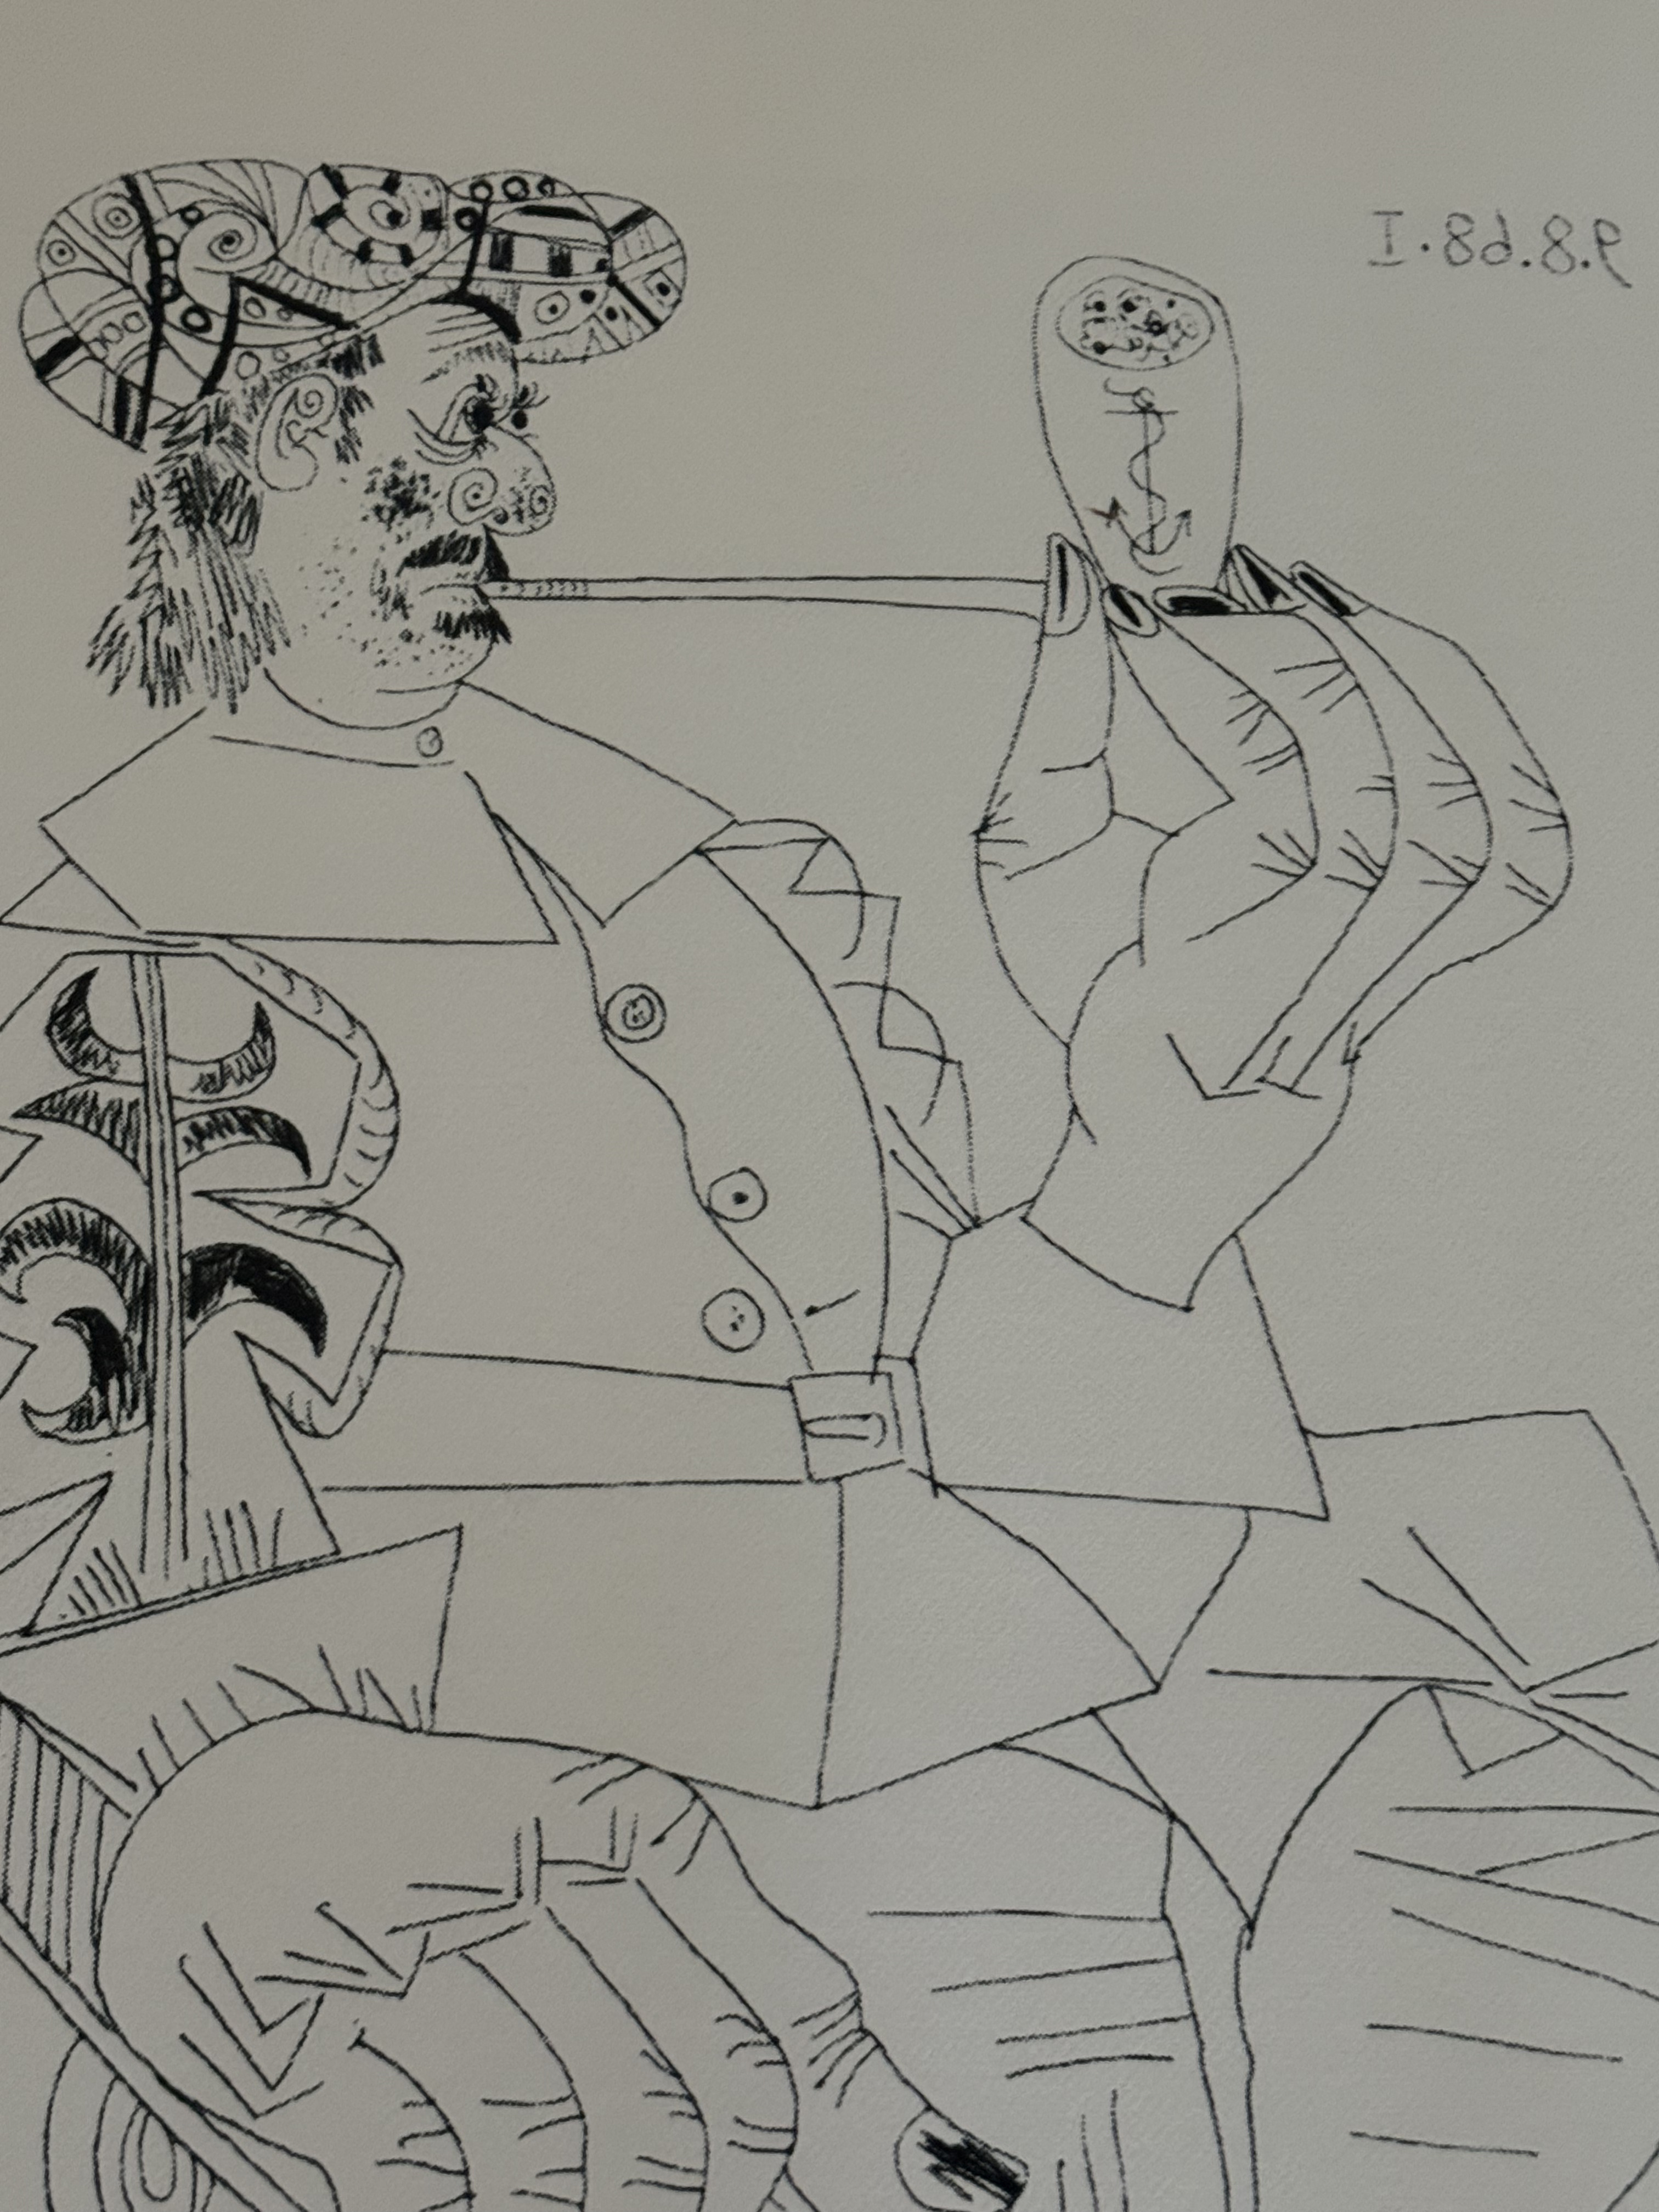 Pablo Picasso offset lithograph plate signed hand numbered - Image 3 of 6